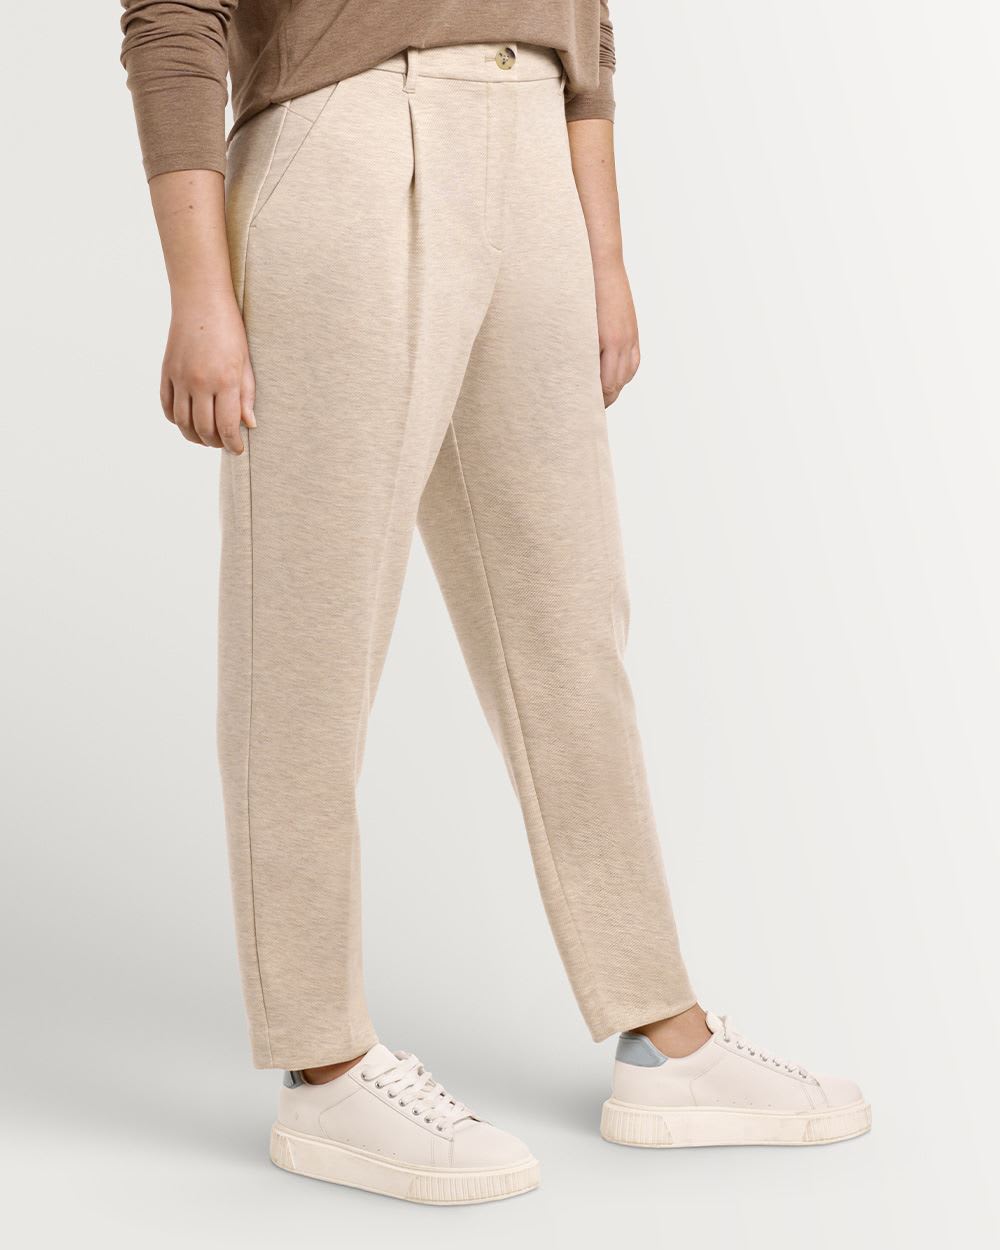 Textured Tapered Leg Modern Stretch Trousers